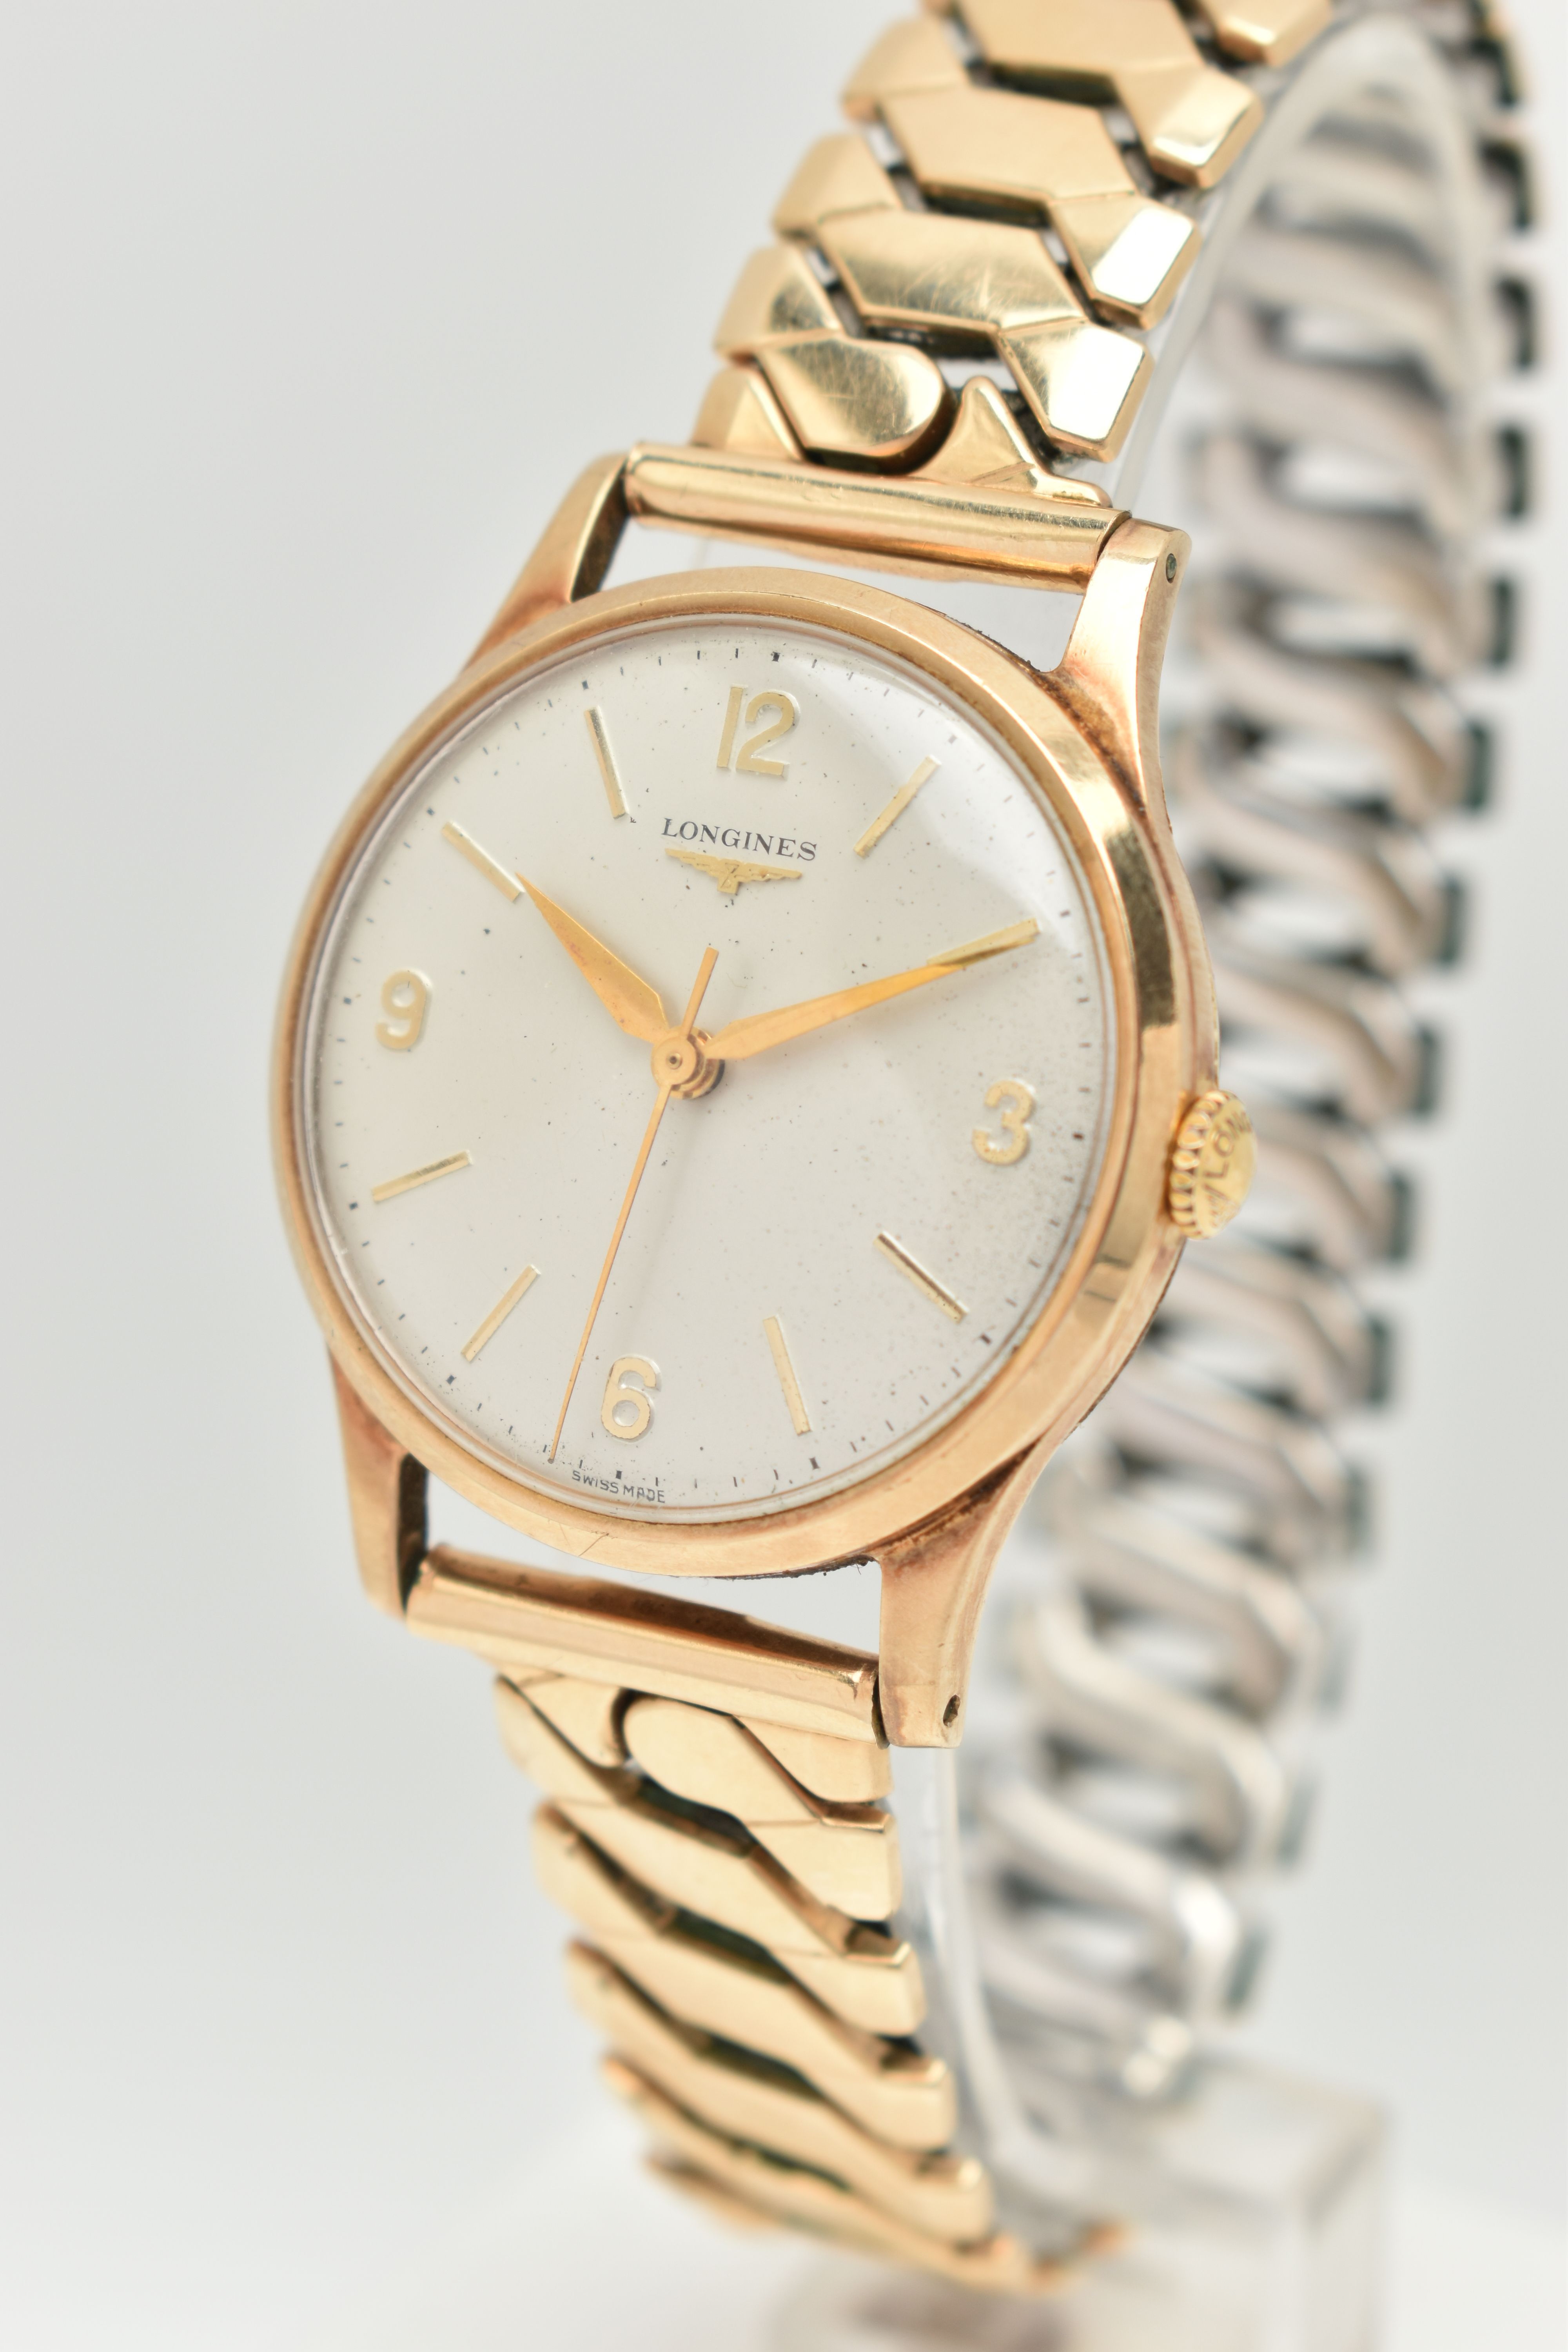 A GENTS 9CT GOLD 'LONGINES' WRISTWATCH, manual wind, round silver dial signed 'Longines', Arabic - Image 3 of 6